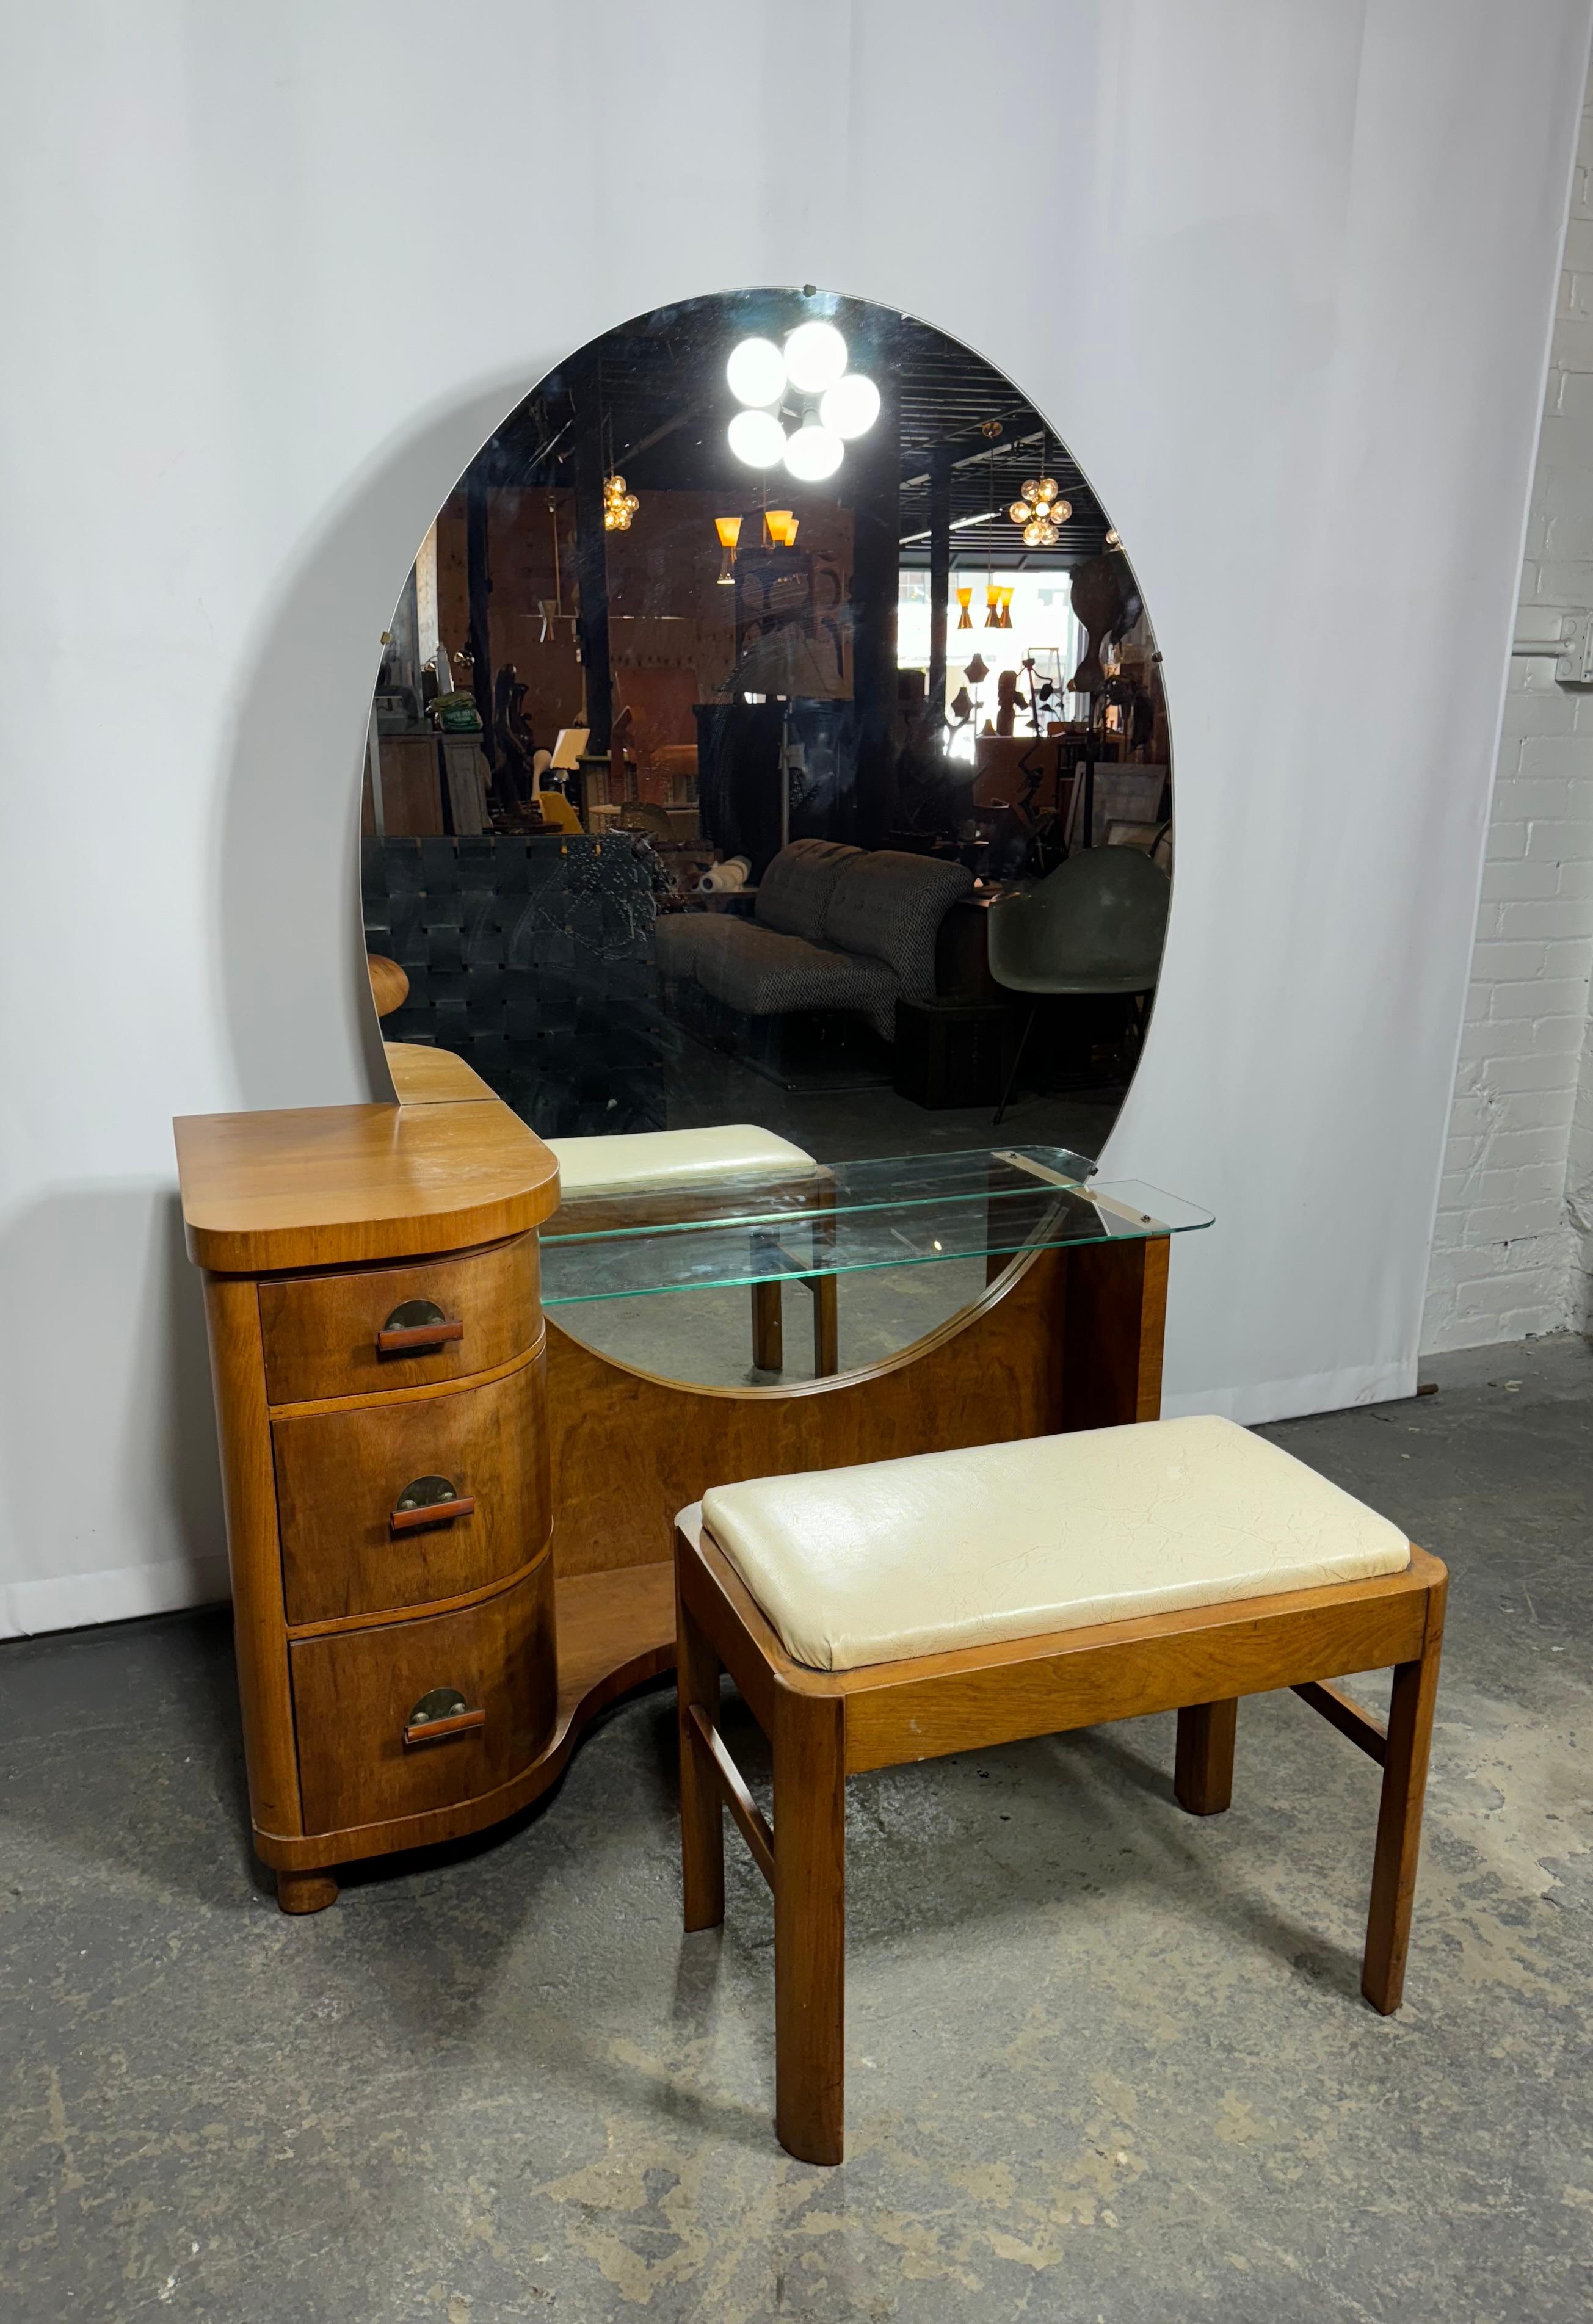 Classic American Art Deco Vanity /Dressing Table and bench by Henry STEUL & sons,, Superior quality and design. unusual oval mirror, brass and bakelite hand pulls.. Wonderful figured walnut wood,, 3-drawers, glass shelf,, Stunning design. Hand